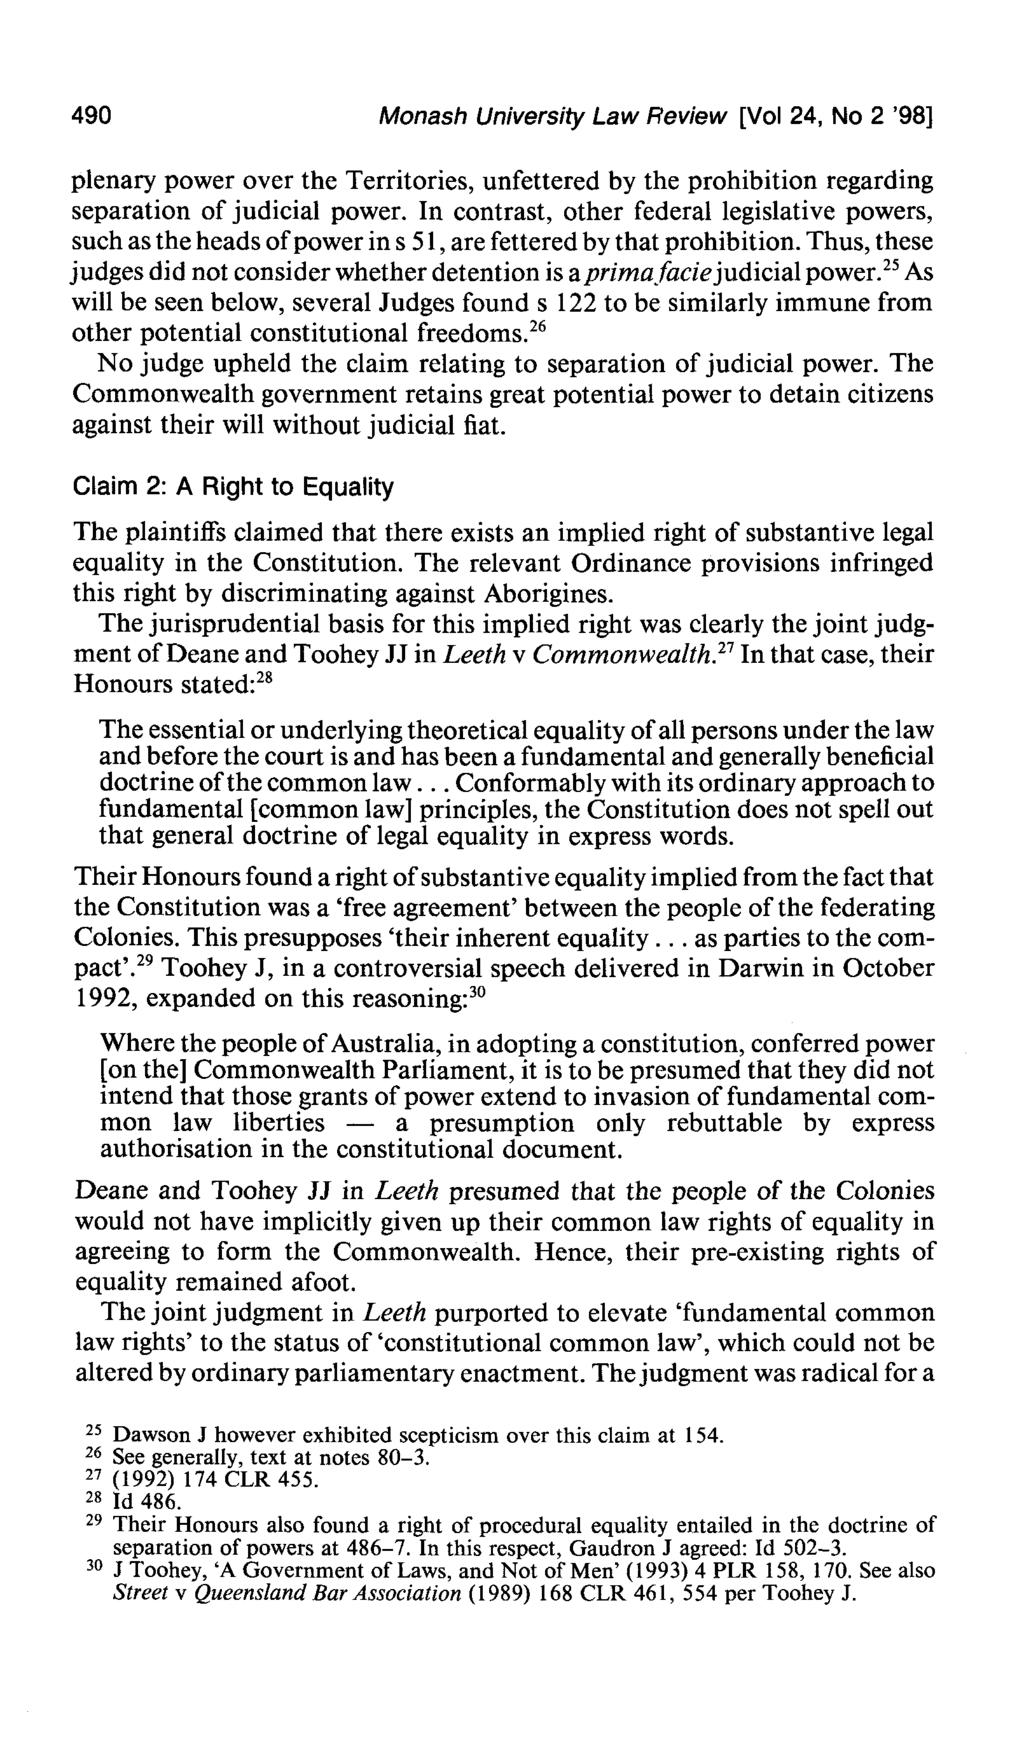 490 Monash University Law Review [Vol 24, No 2 '981 plenary power over the Territories, unfettered by the prohibition regarding separation of judicial power.